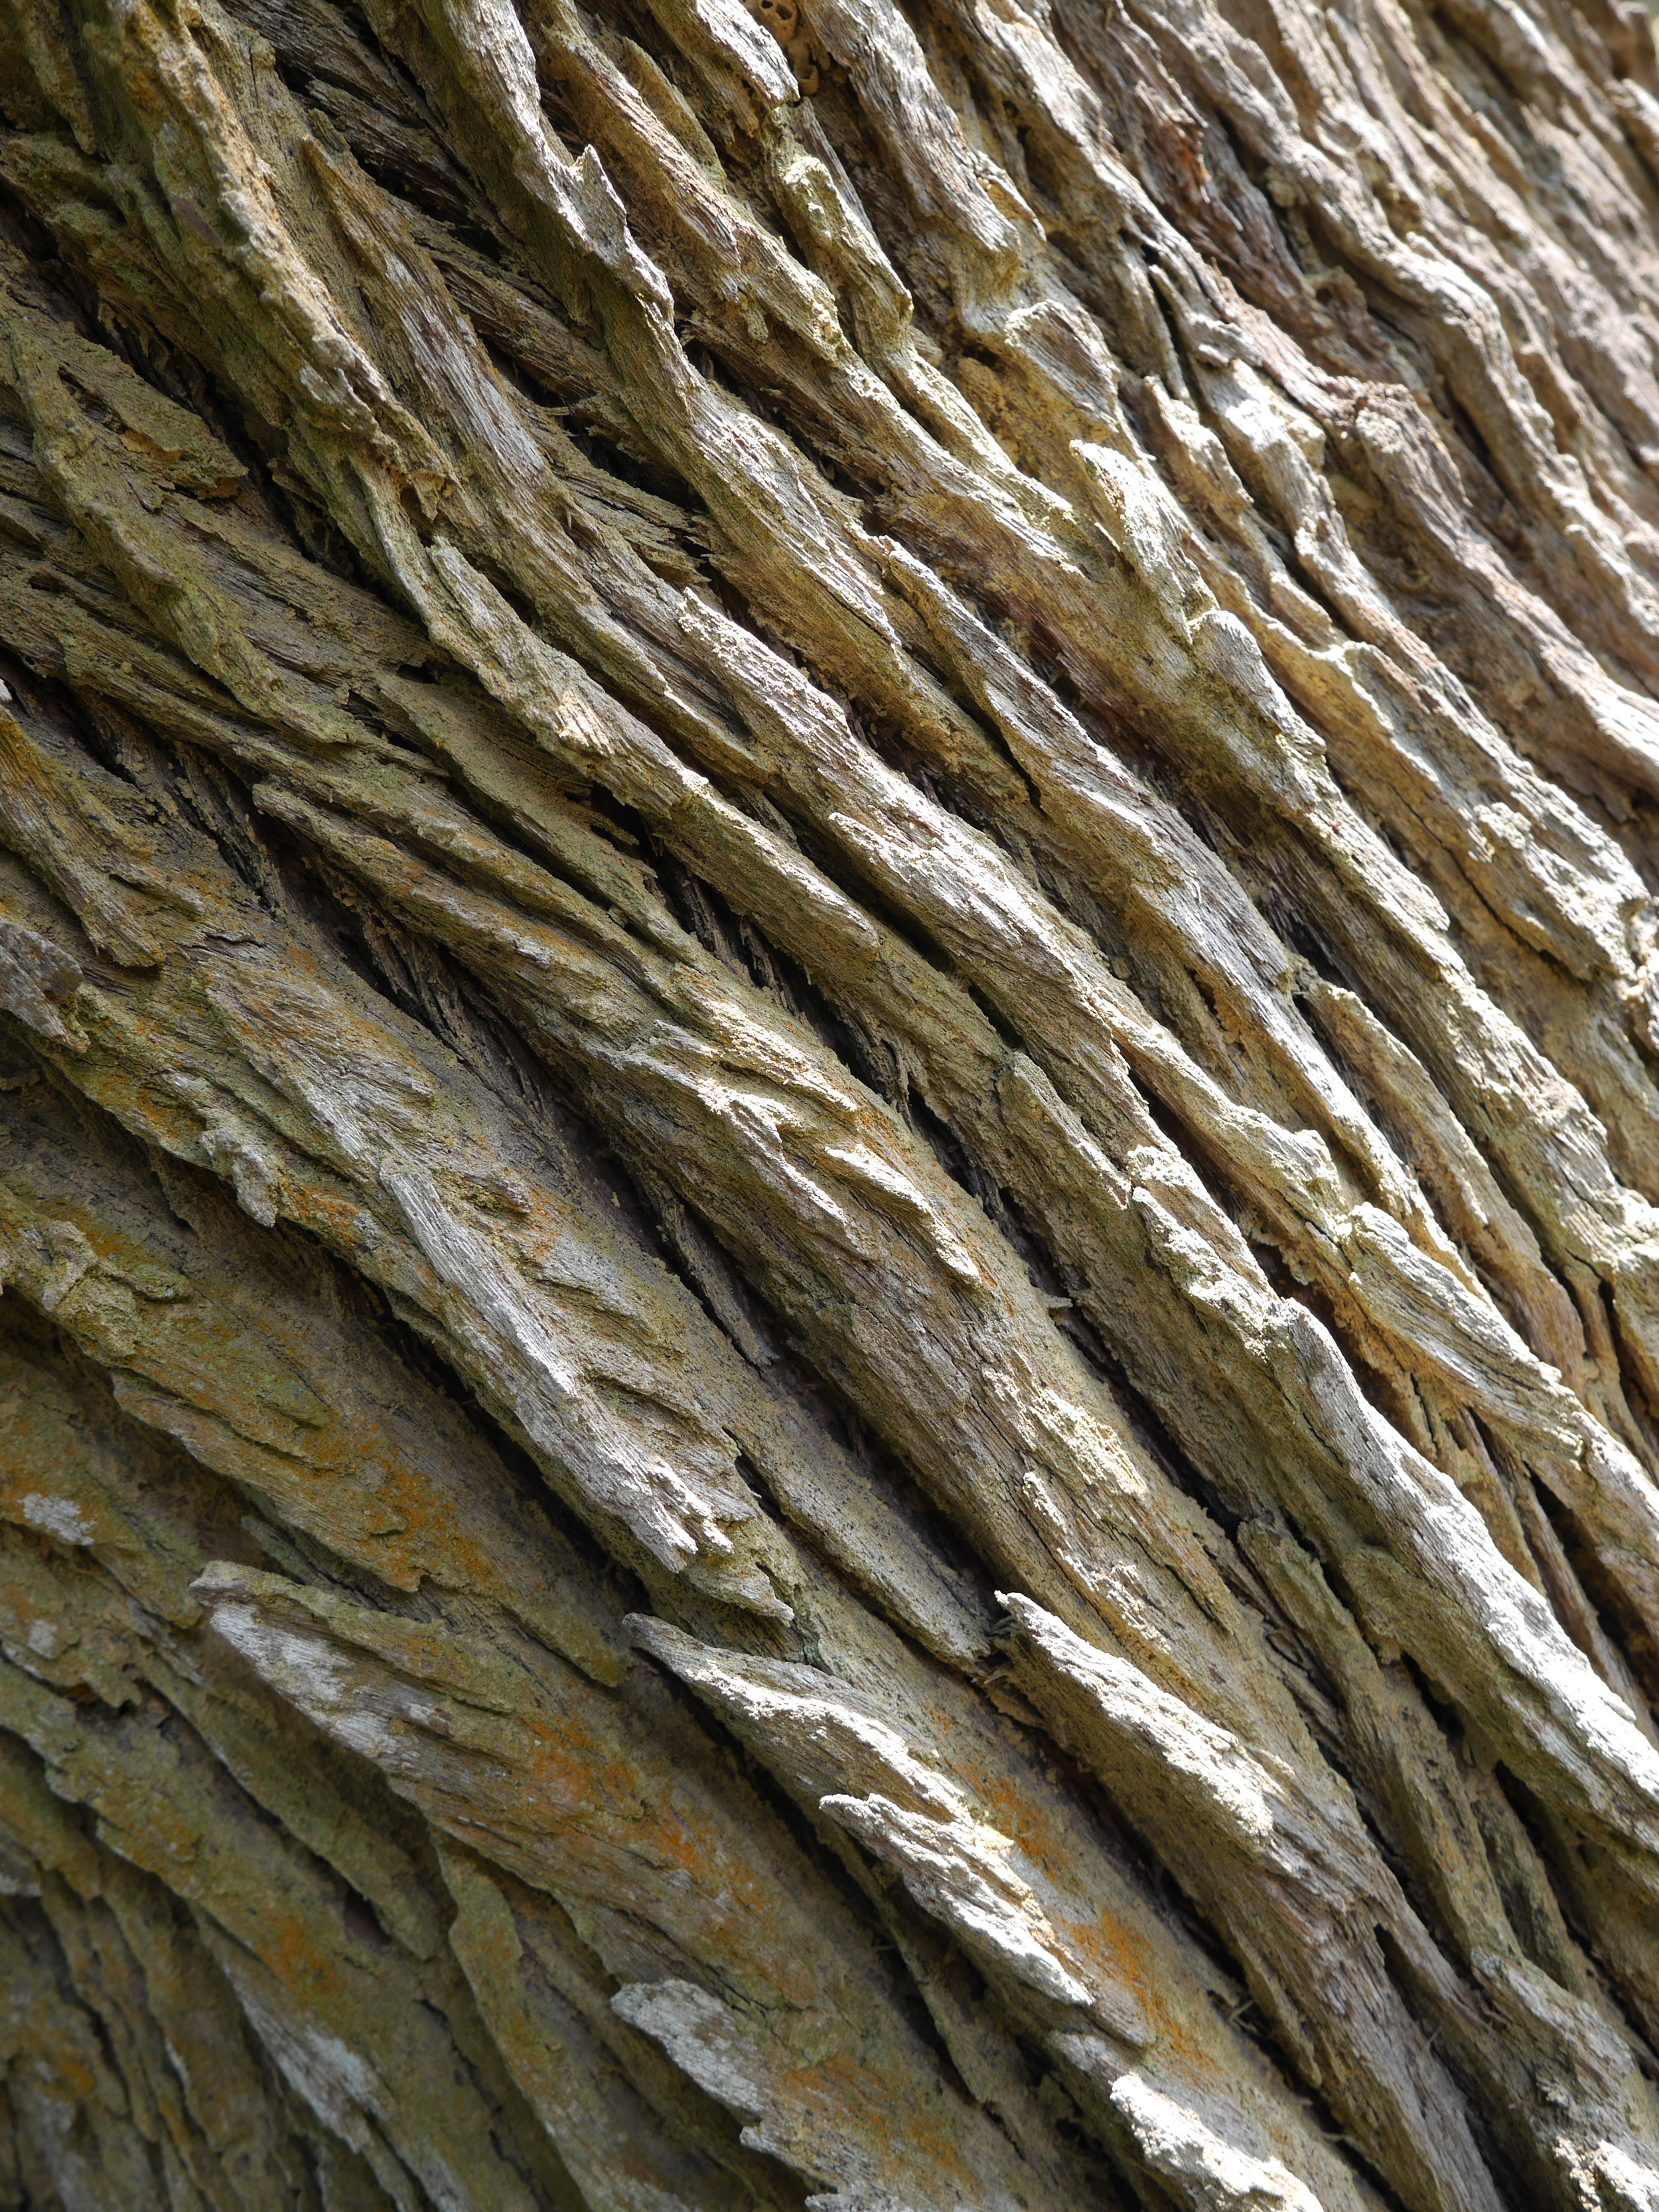  Couldn't resist a shot of the bark texture on this tree. 